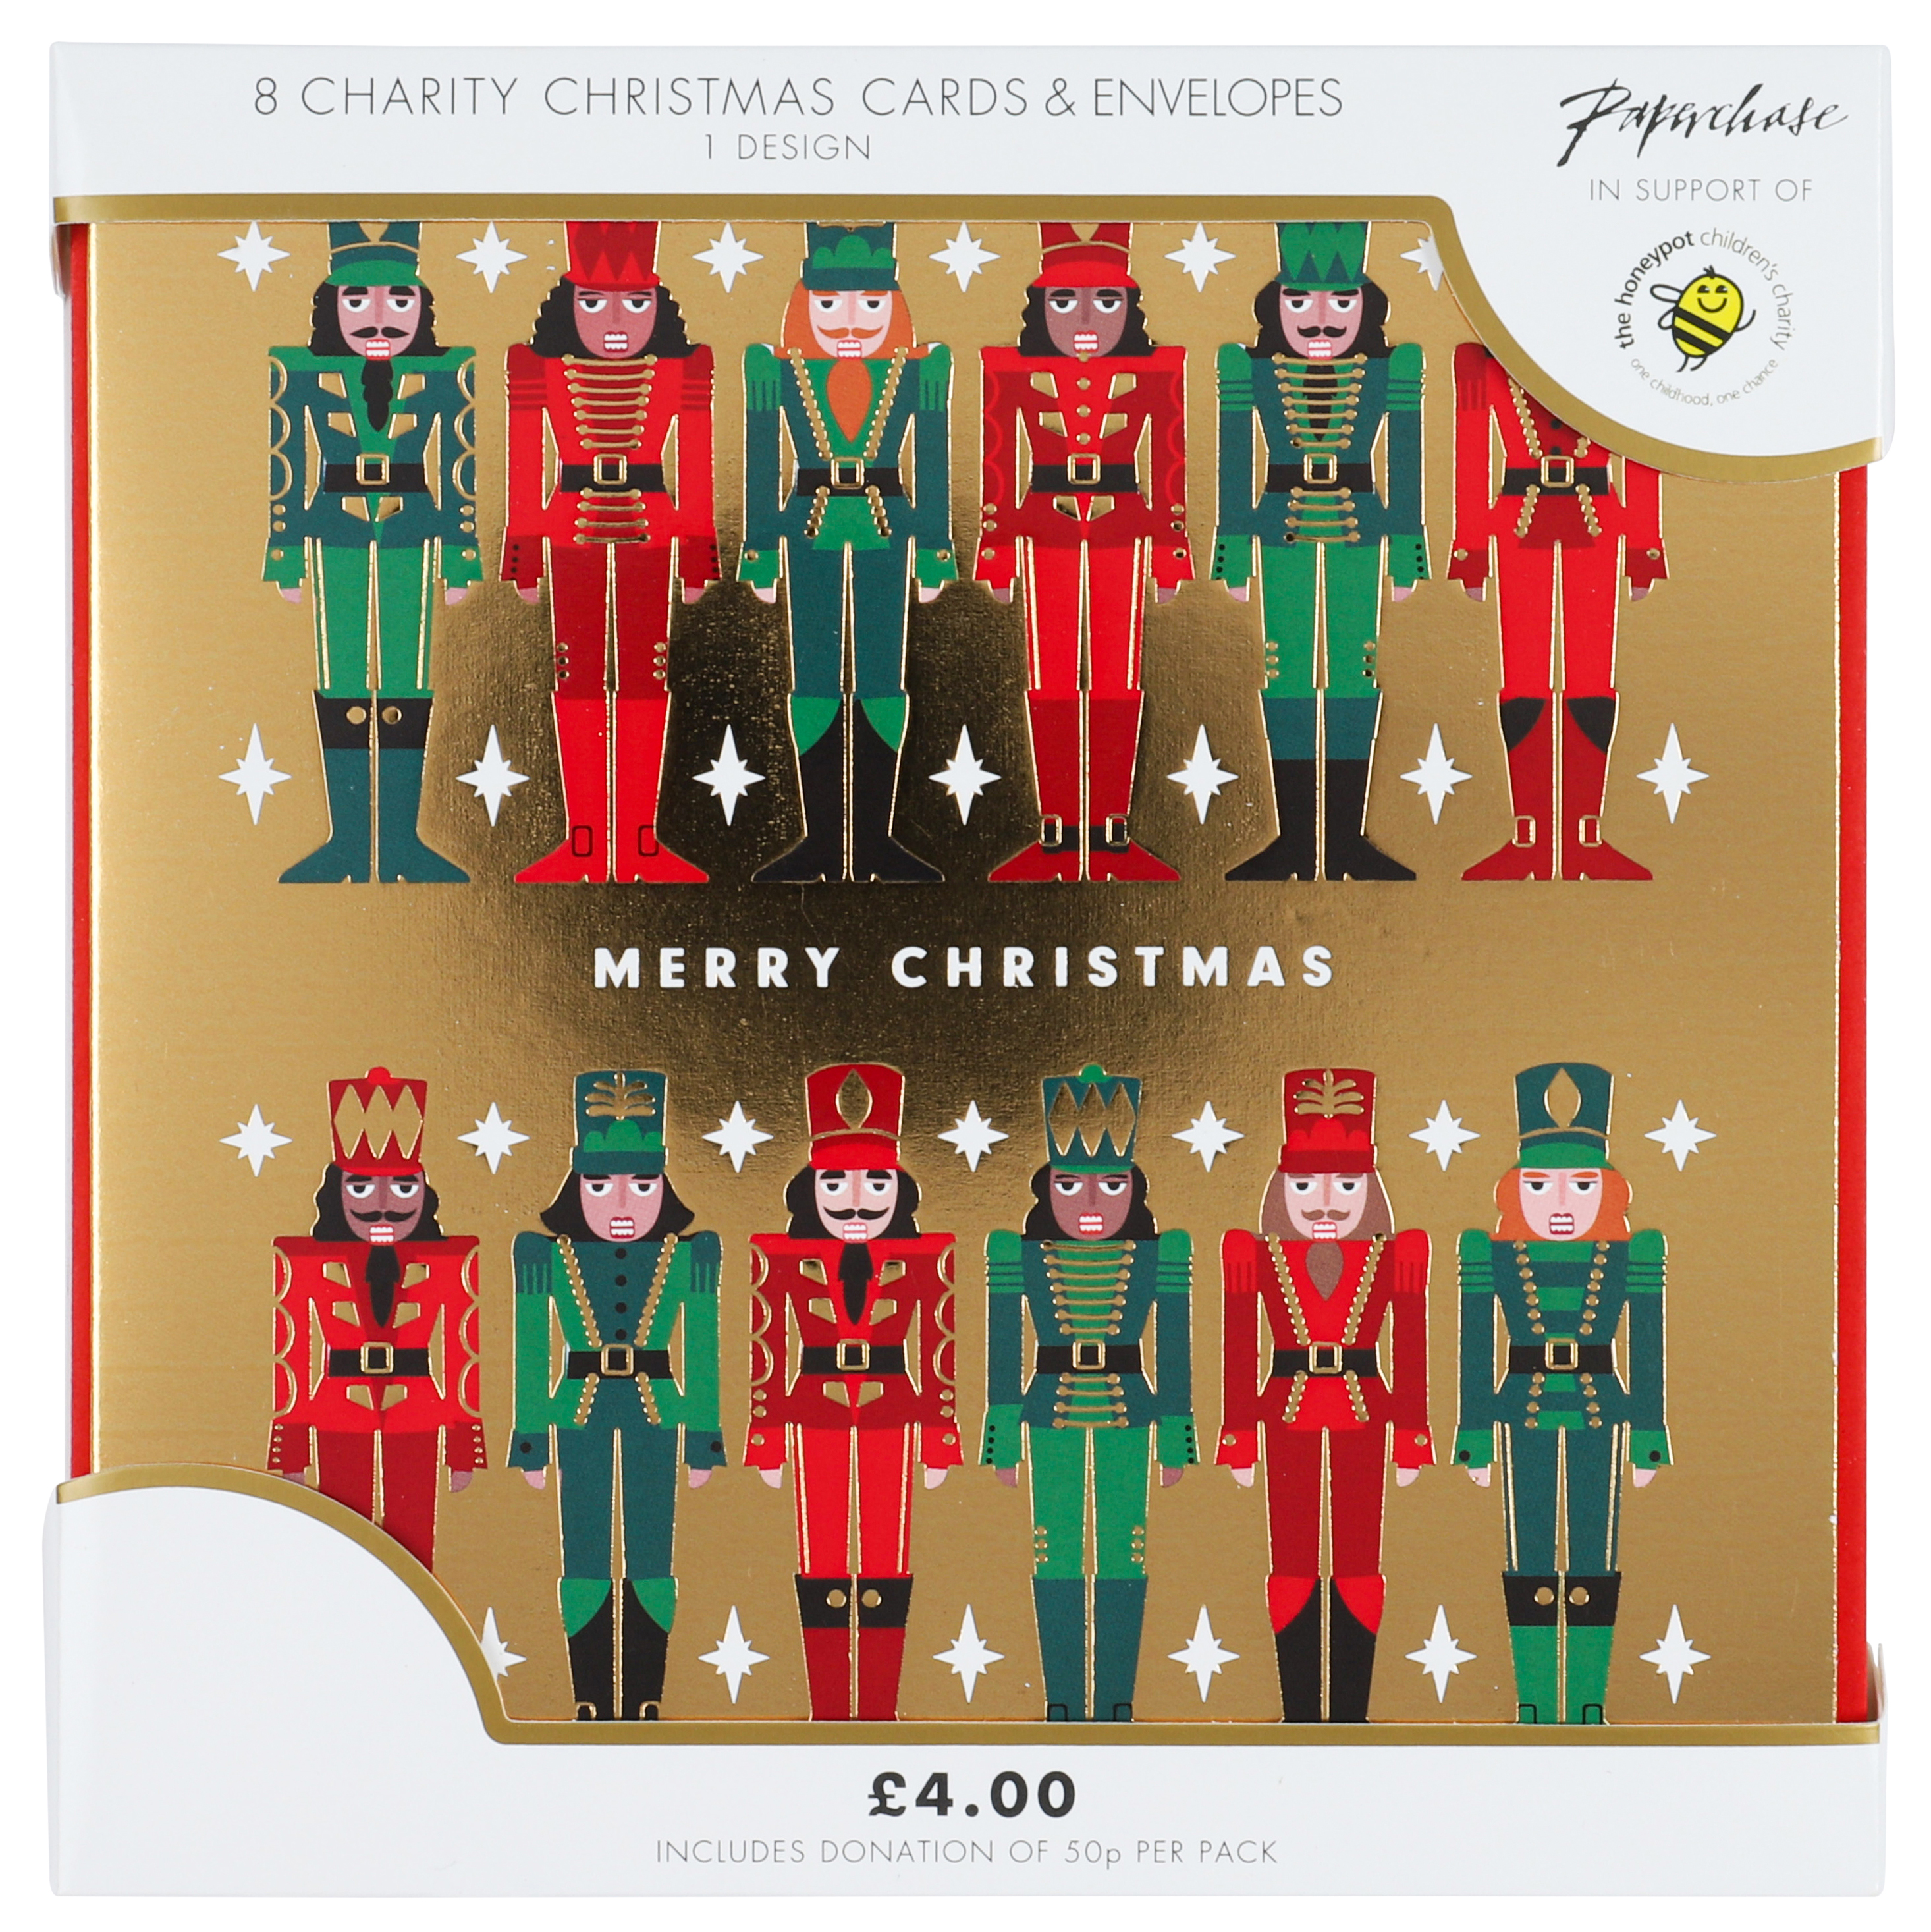 Above: Diversity is reflected in Paperchase’s Christmas card selection.